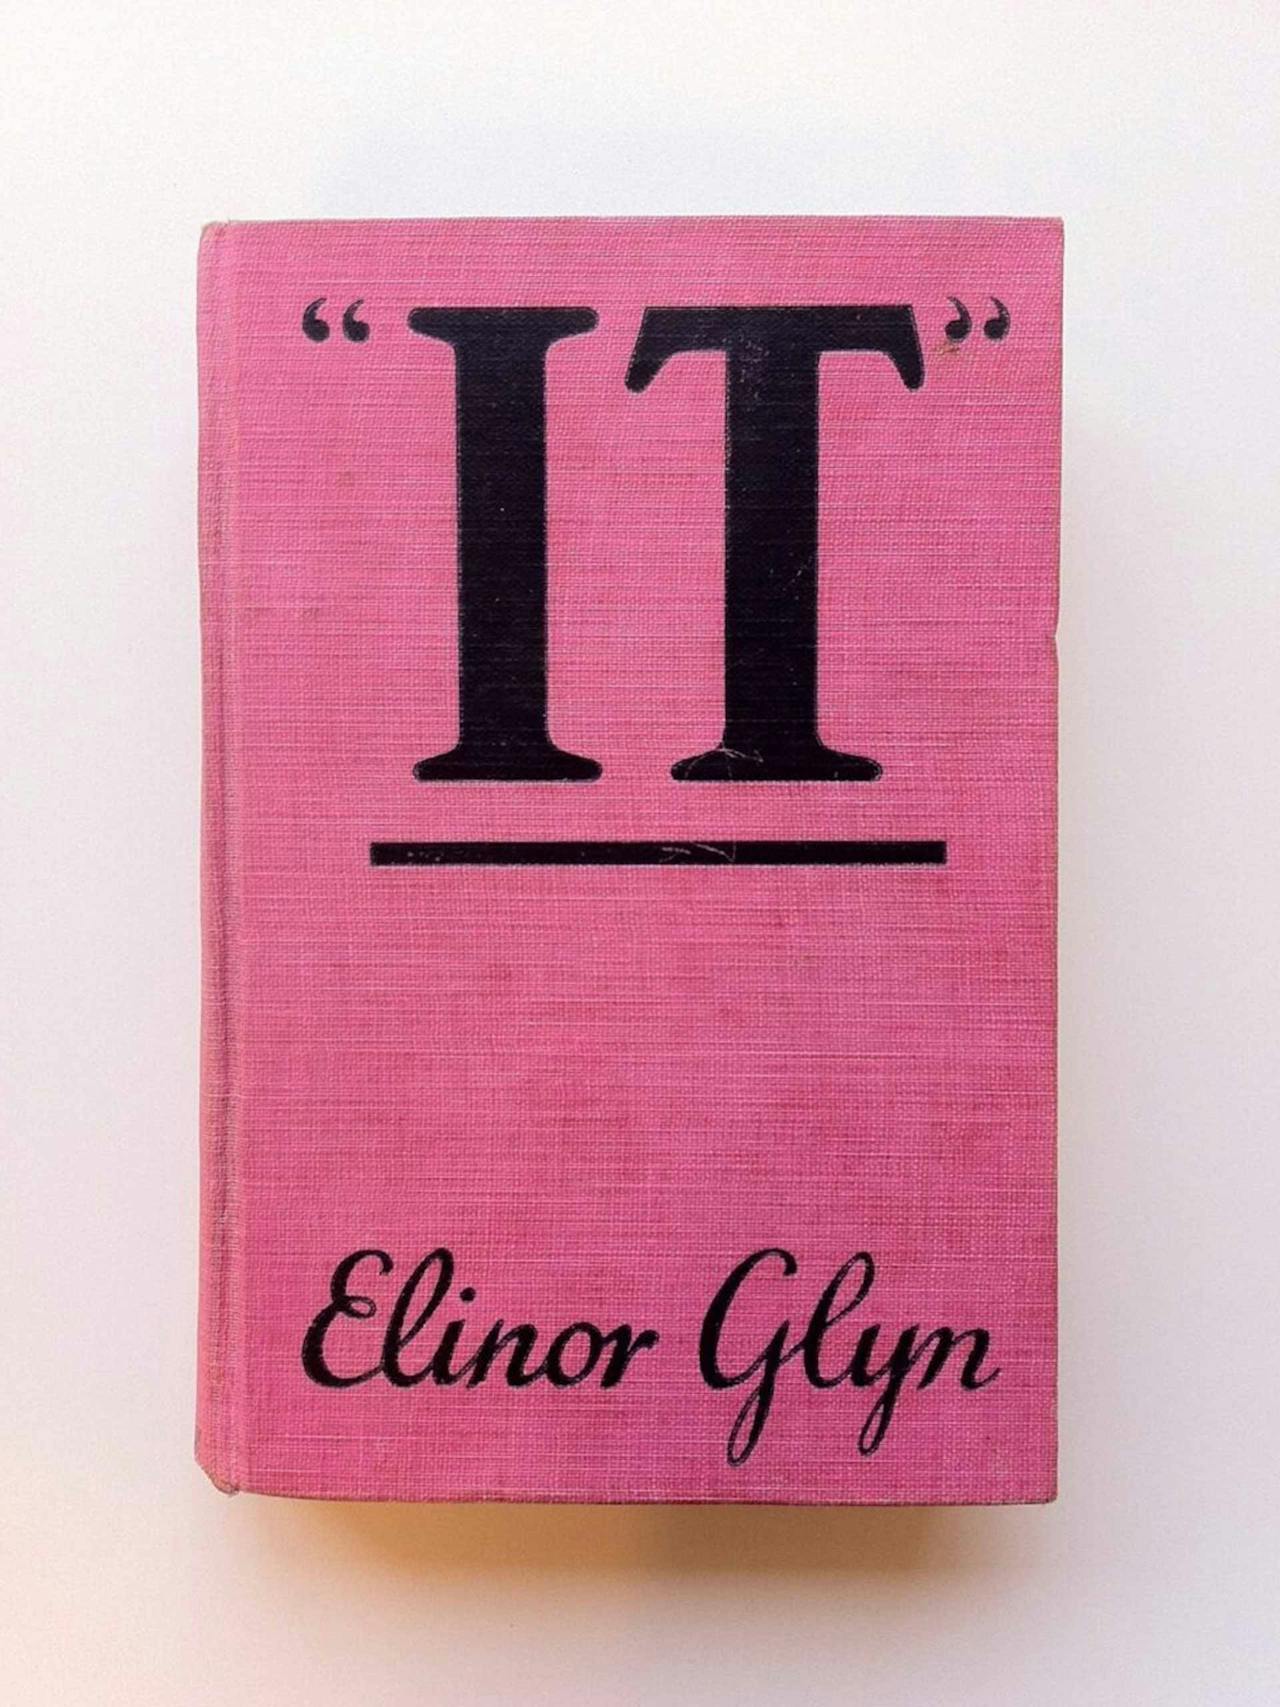 Image: It book cover, Elinor Glyn